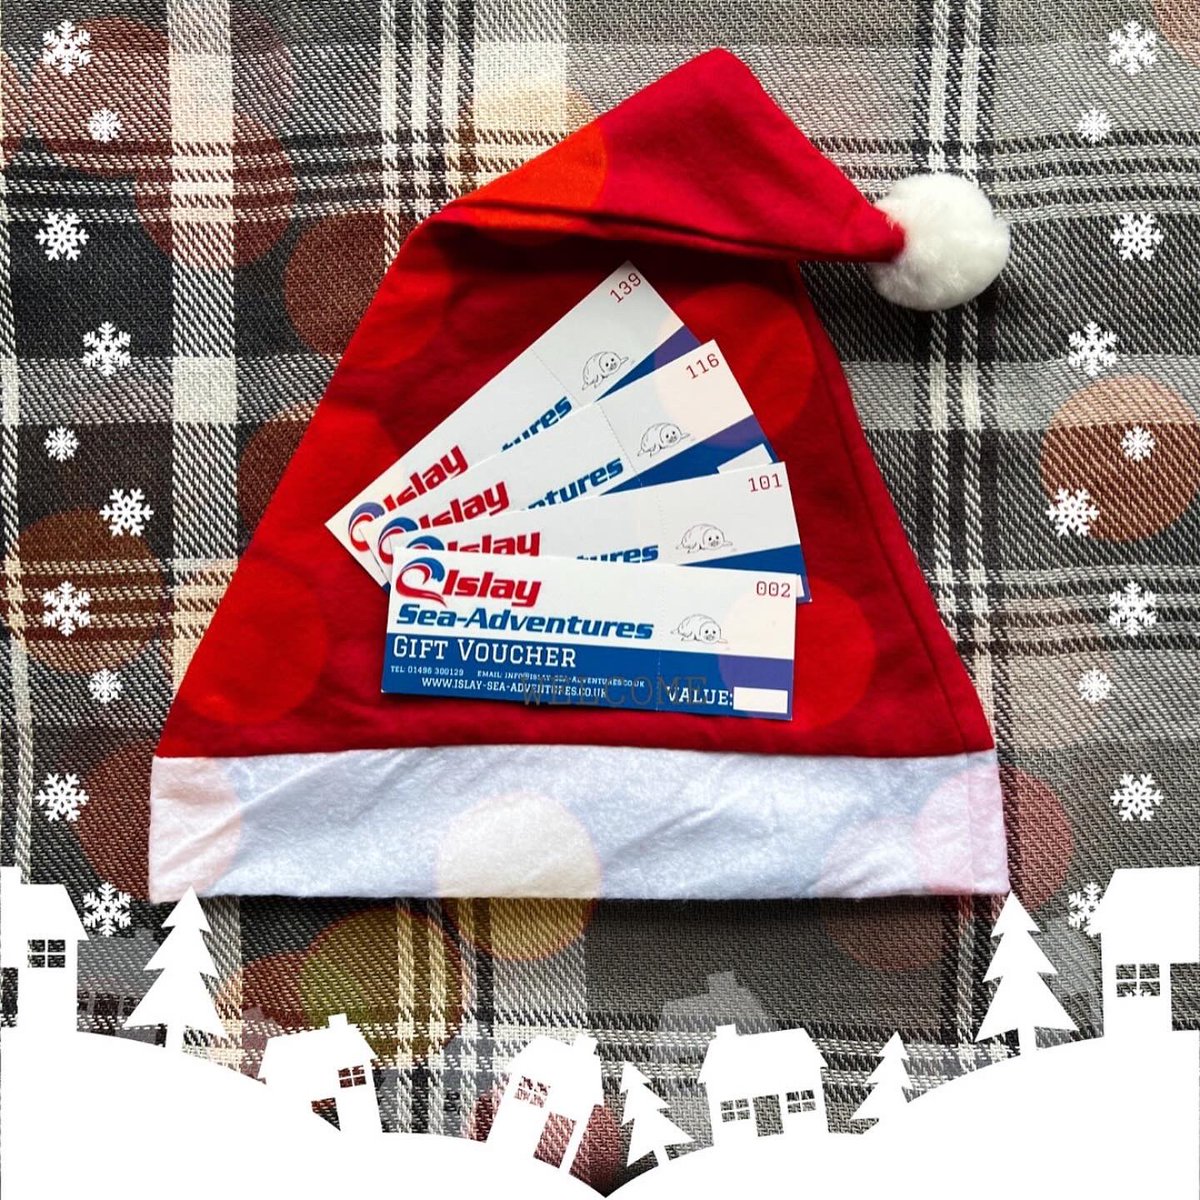 Doing some last minute Christmas shopping? We have gift vouchers available 🎁 There are different designs to pick from & you can choose the value Follow the link islay-sea-adventures.co.uk Or, if you’d prefer, we have some physical vouchers in our office! Give us a call or email!